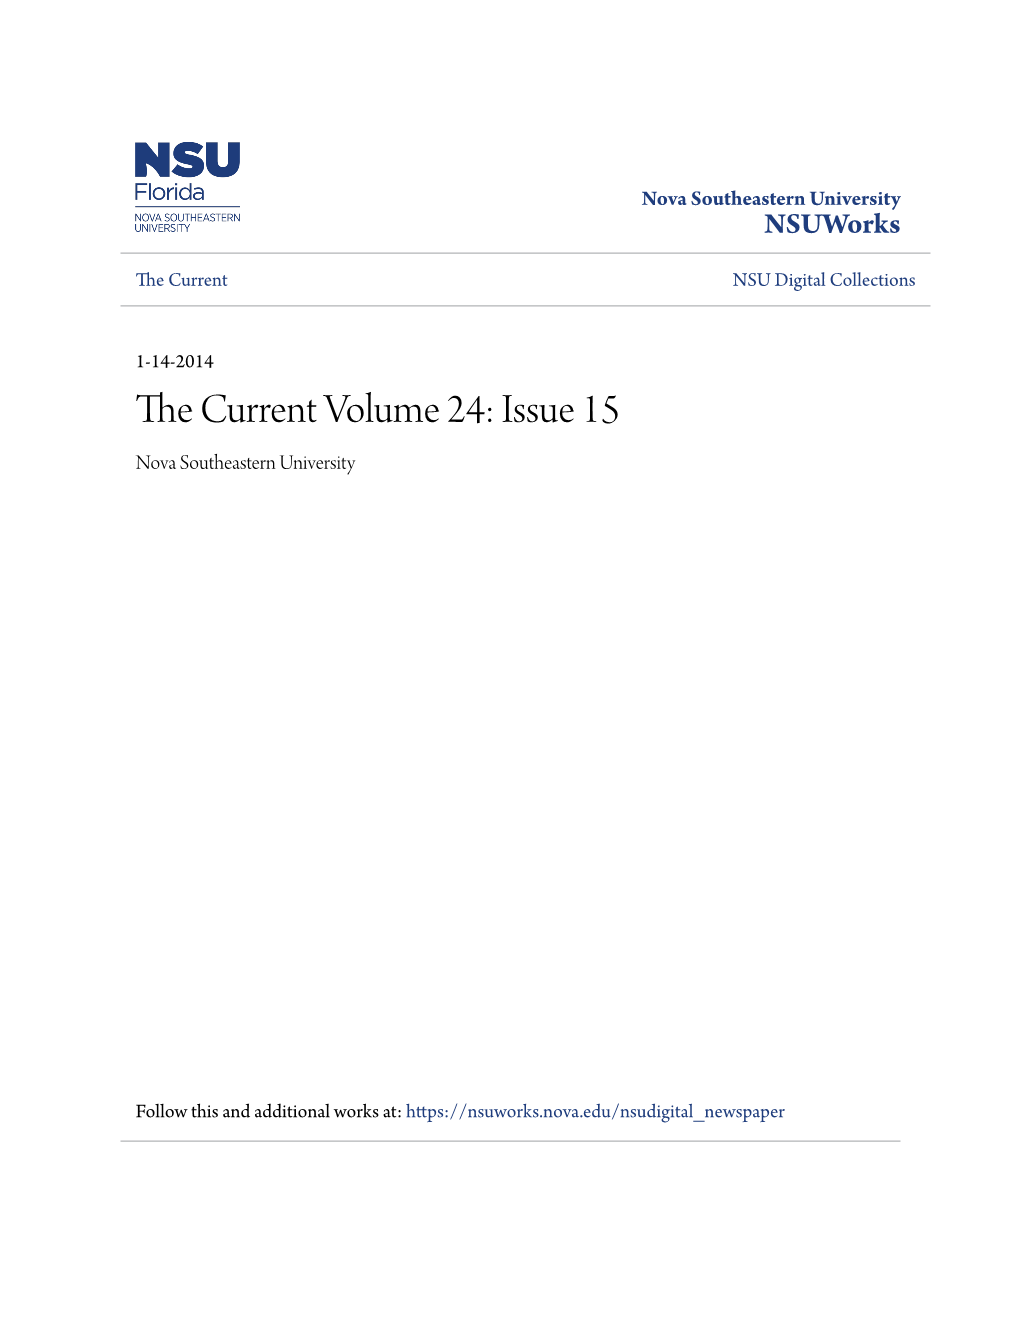 The Current Volume 24: Issue 15